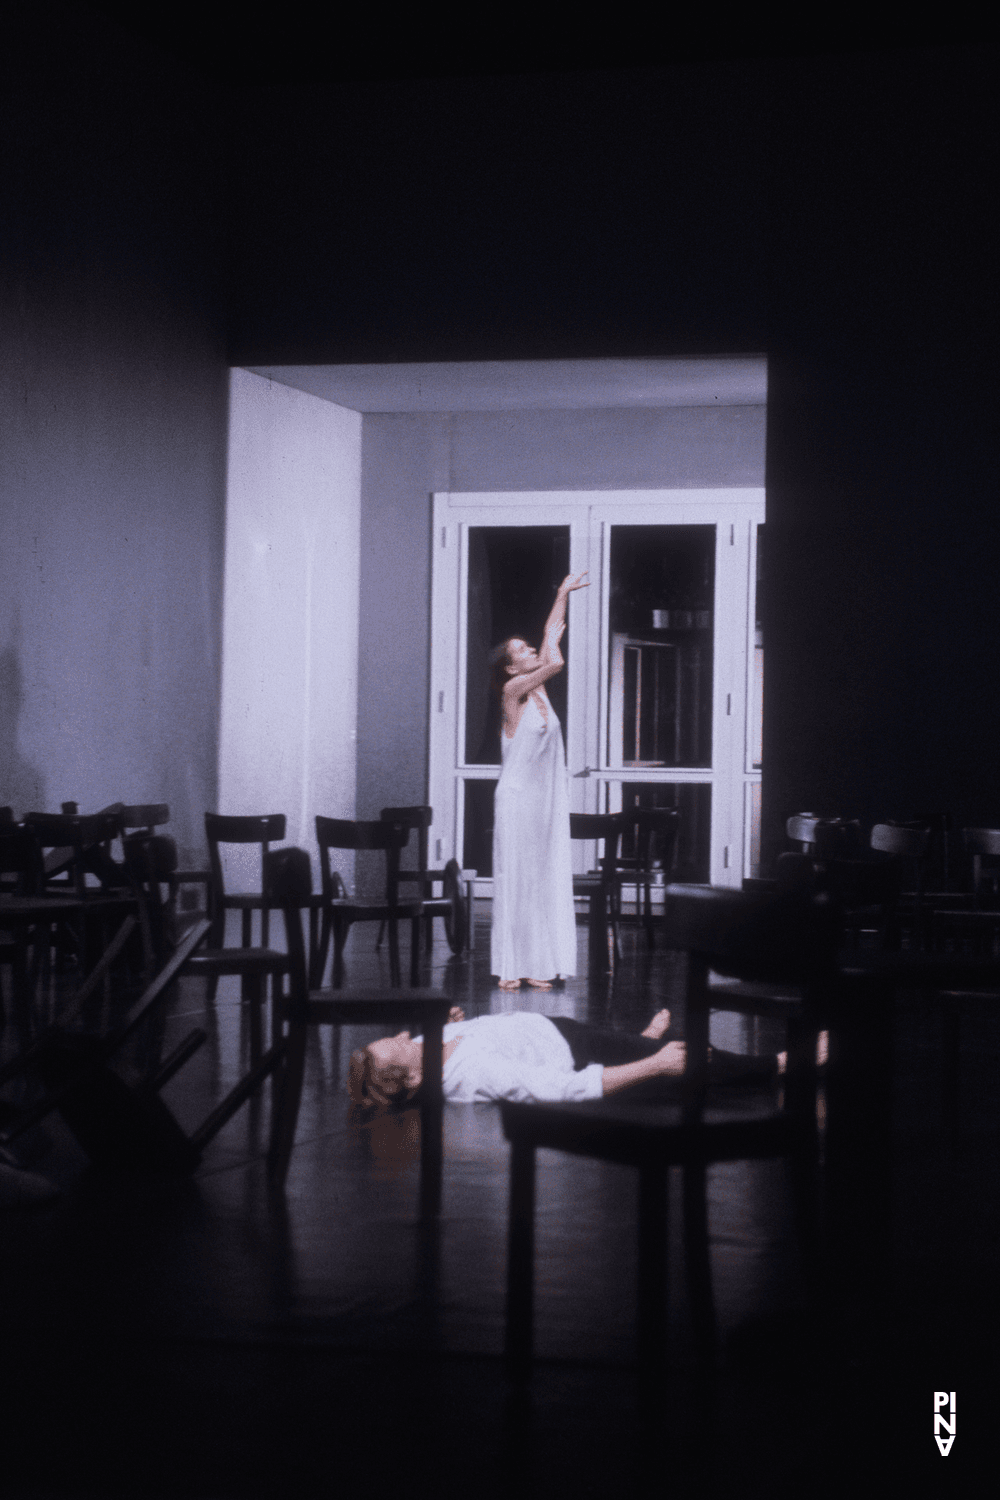 Dominique Mercy and Pina Bausch in “Café Müller” by Pina Bausch